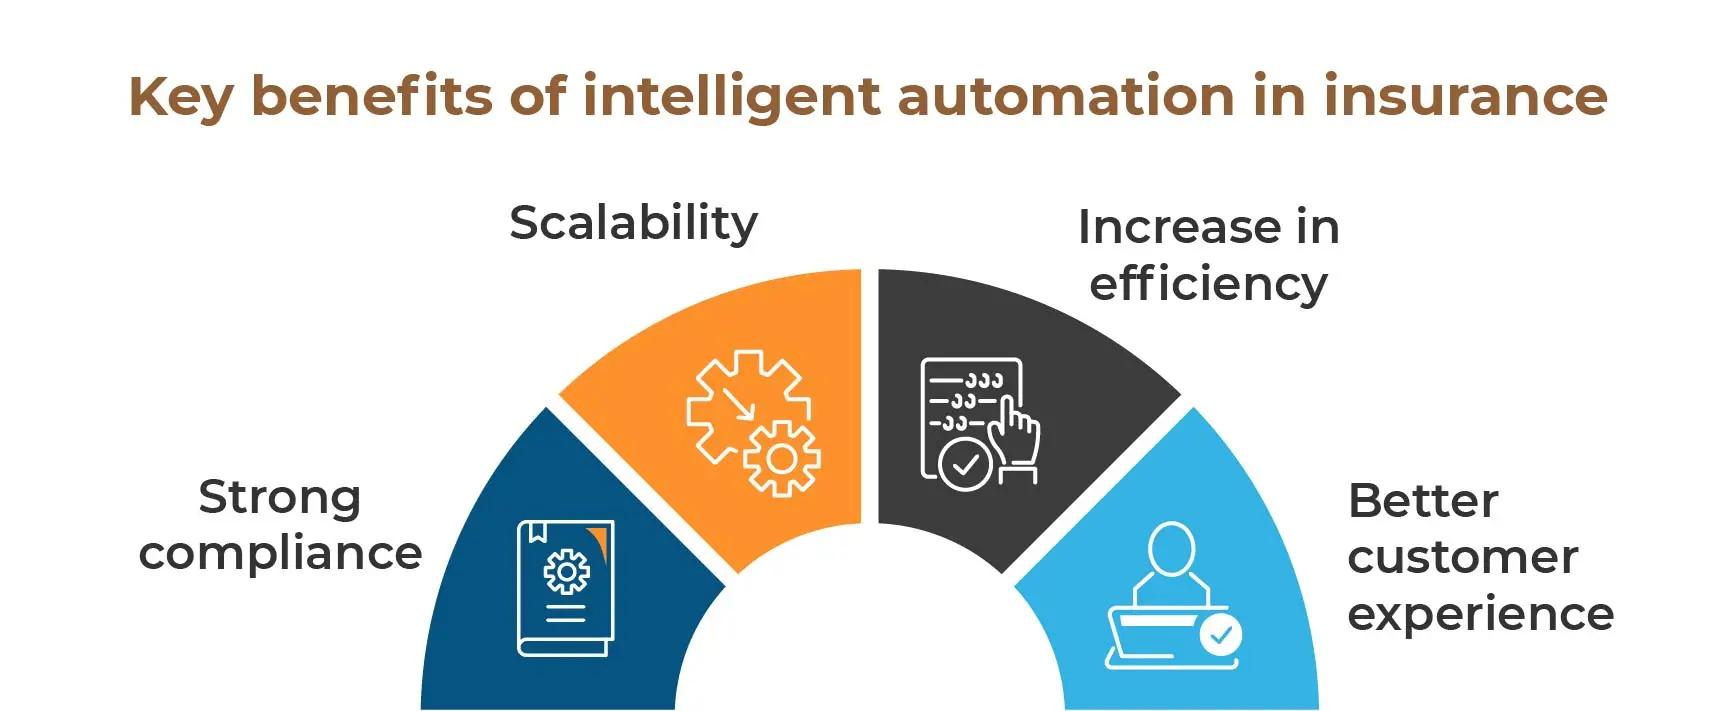 Key benefits of intelligent automation in insurance: